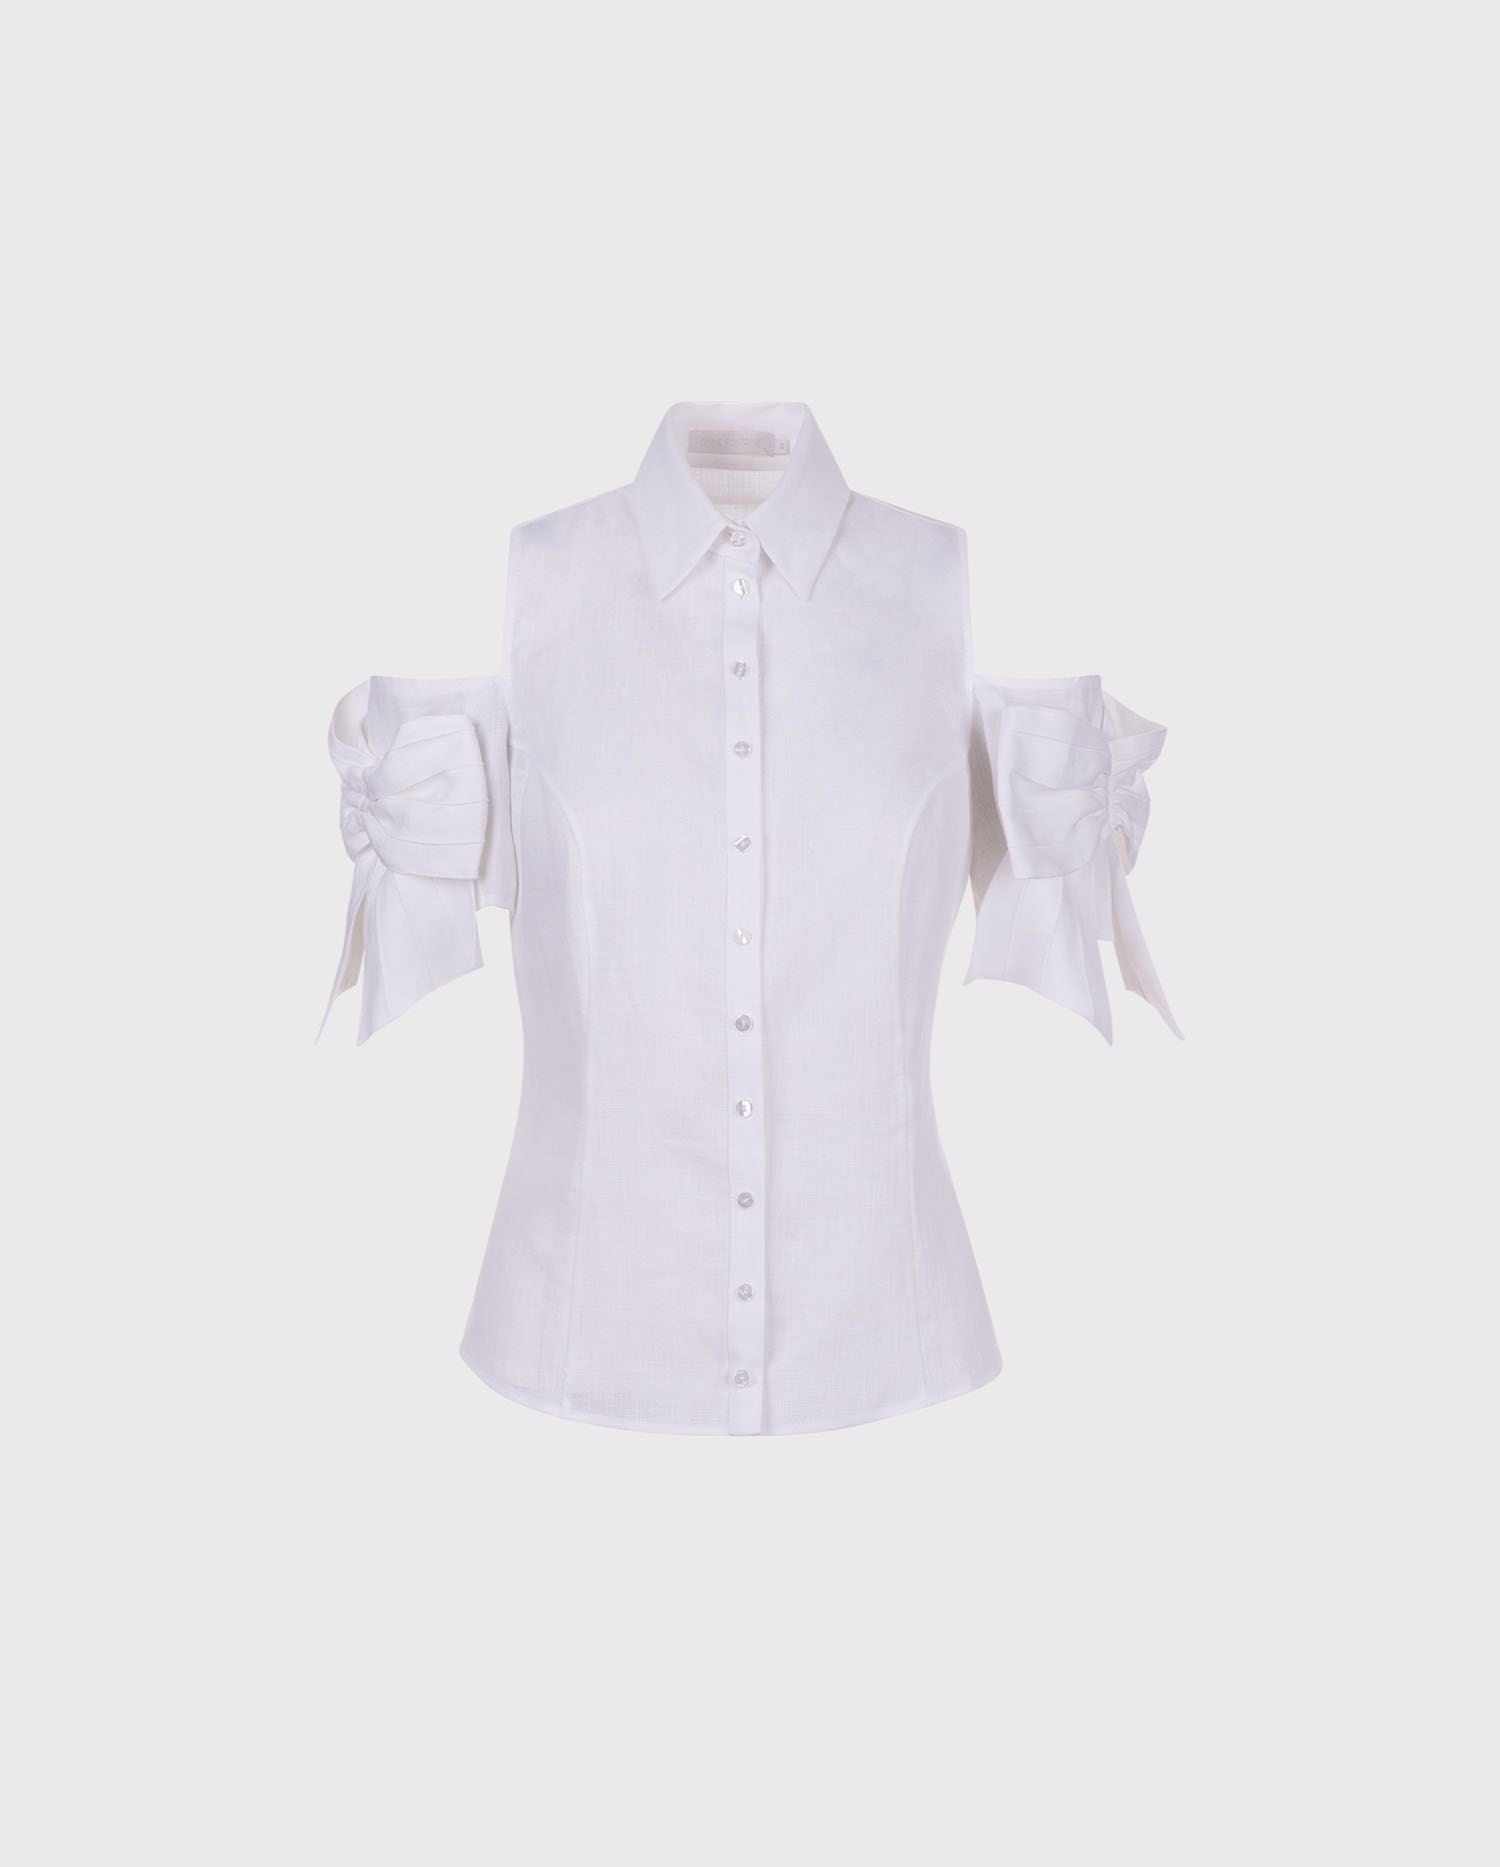 Anne Fontaine CALLA Shirt: White linen shirt with placed bows